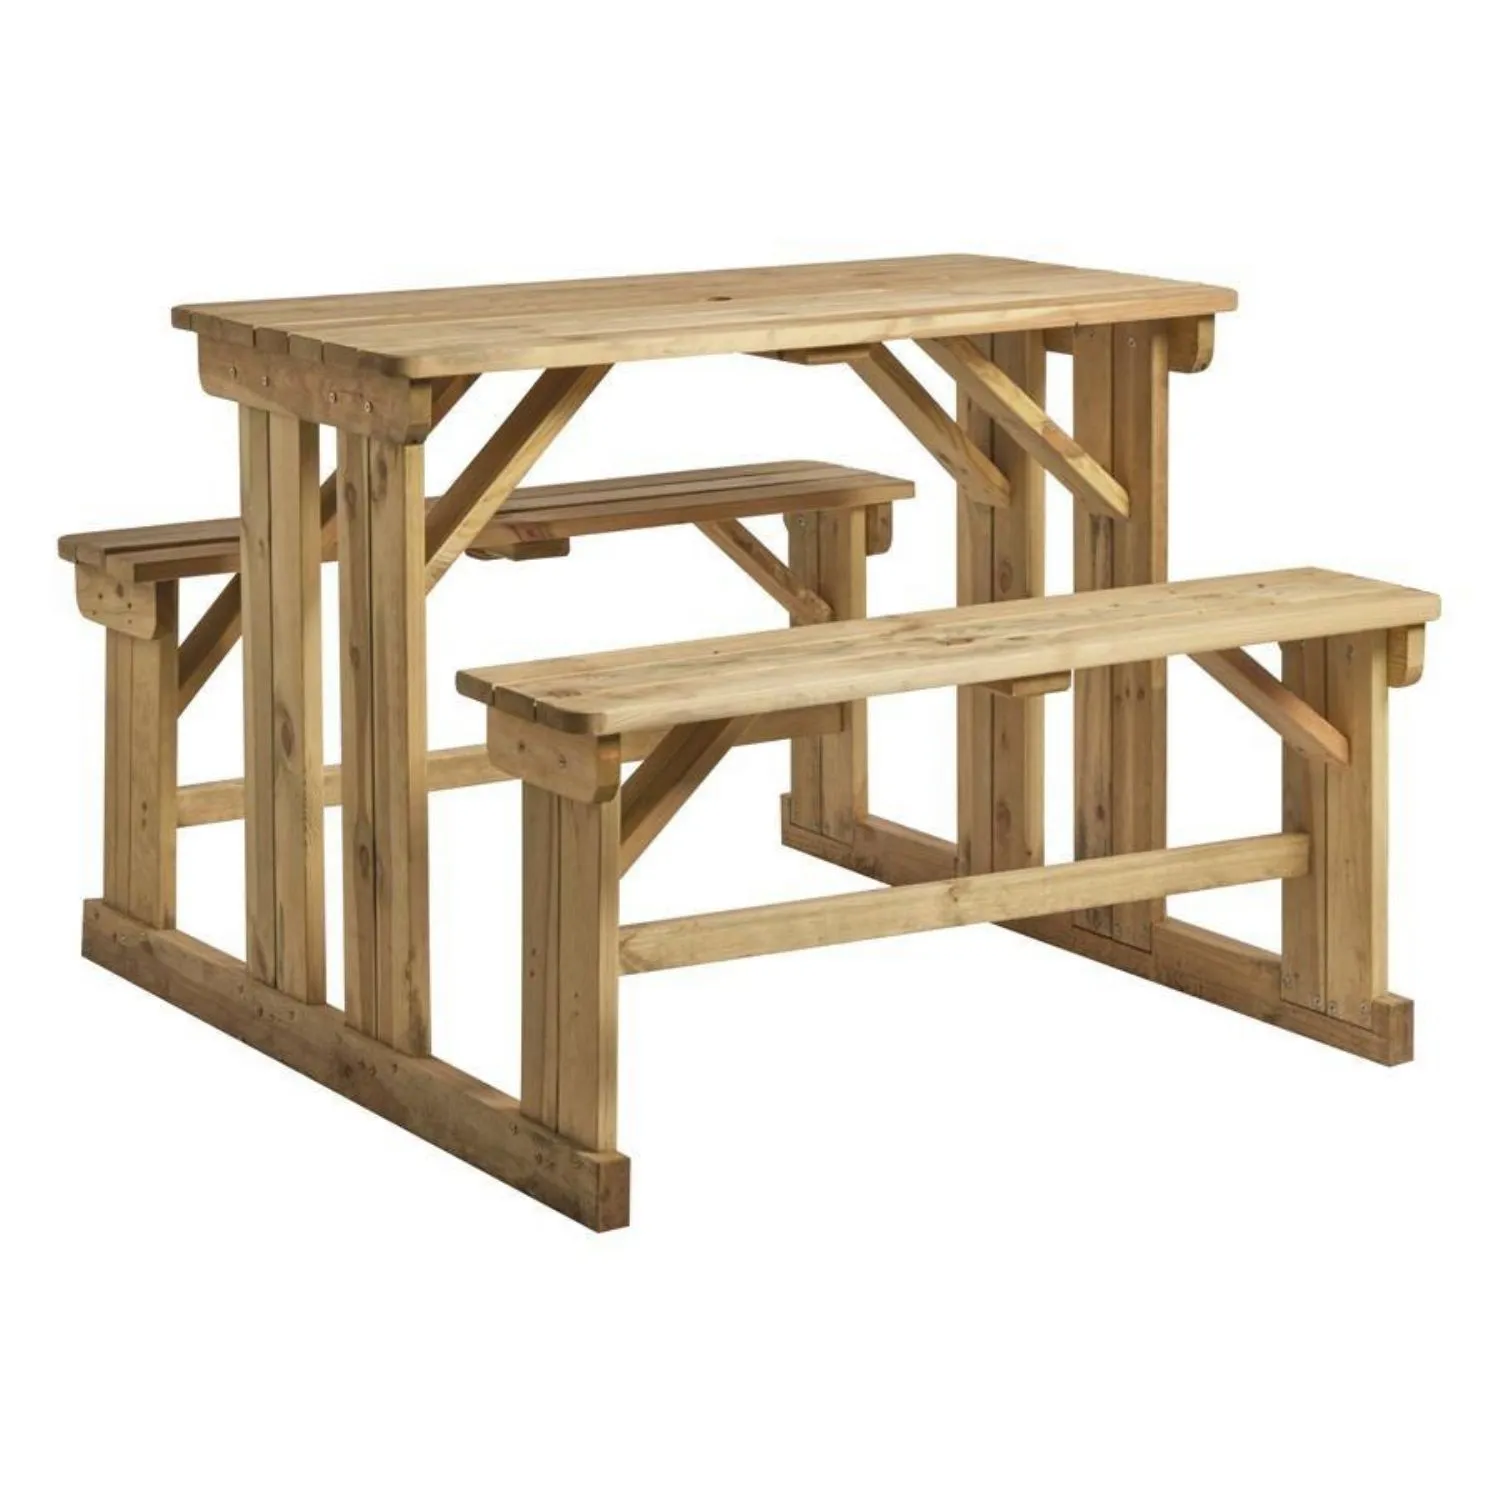 Solid Wood Picnic Bench Set 8 Seater 170cm Bar Height